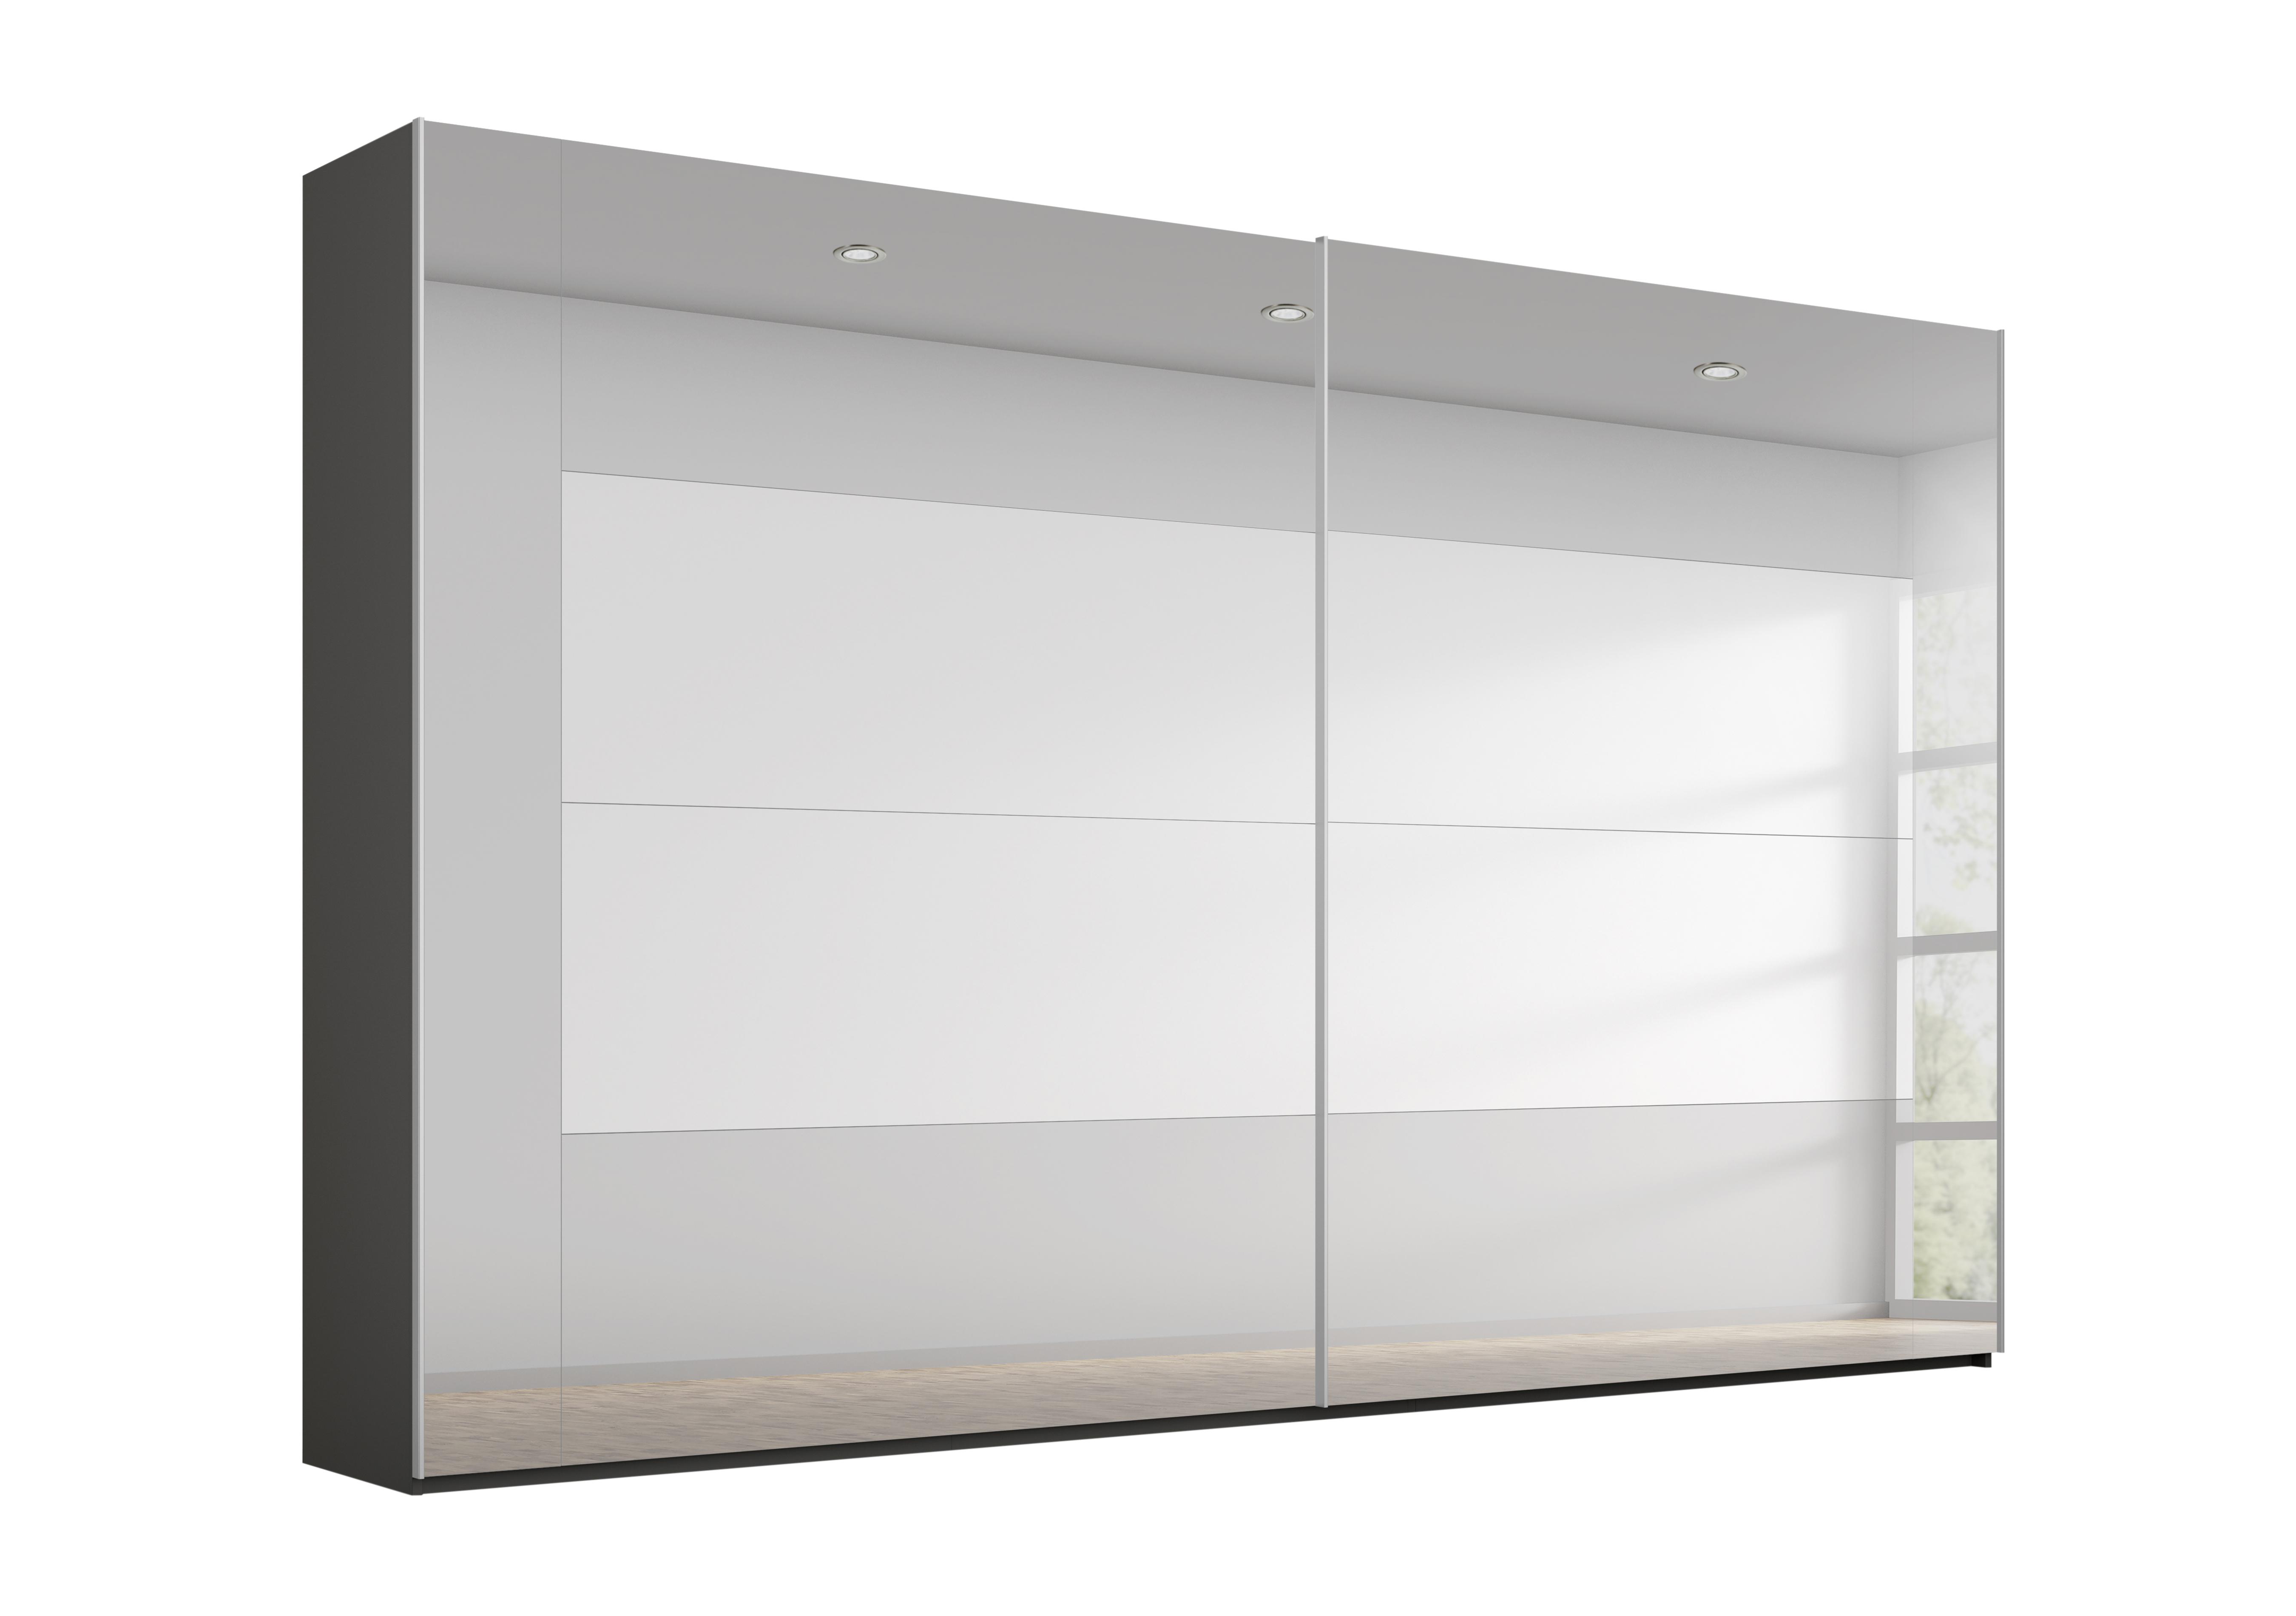 Rio 316cm 2 Door Sliding Wardrobe with Basic Interior Fittings Package in Graphite Carc/ Grey Mirr on Furniture Village